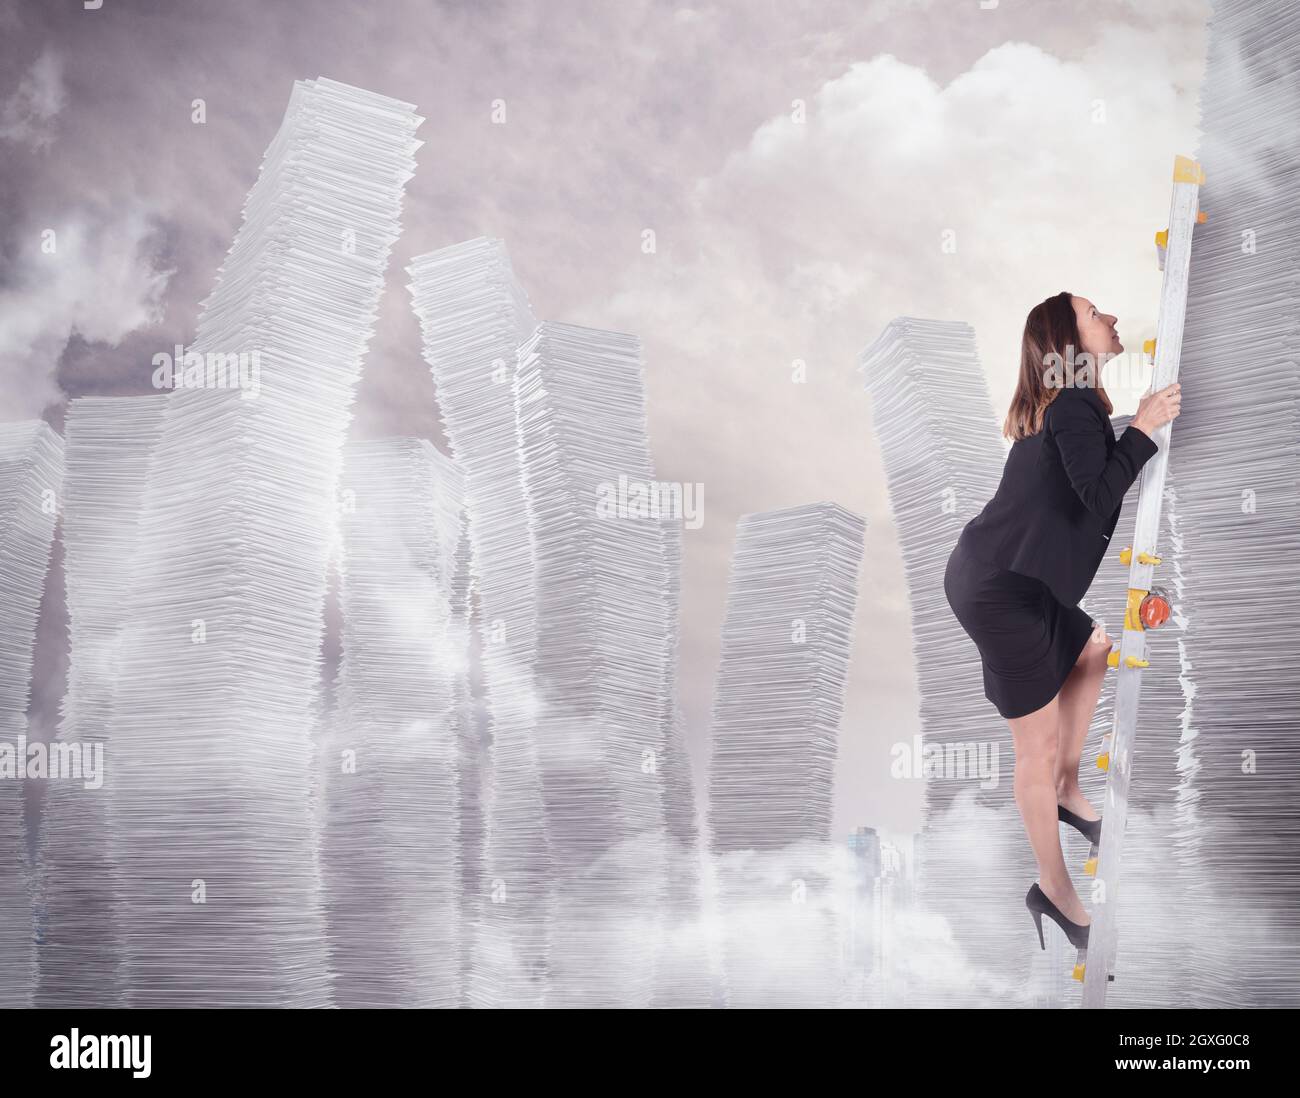 Businesswoman climbs on scale of sheets piles Stock Photo